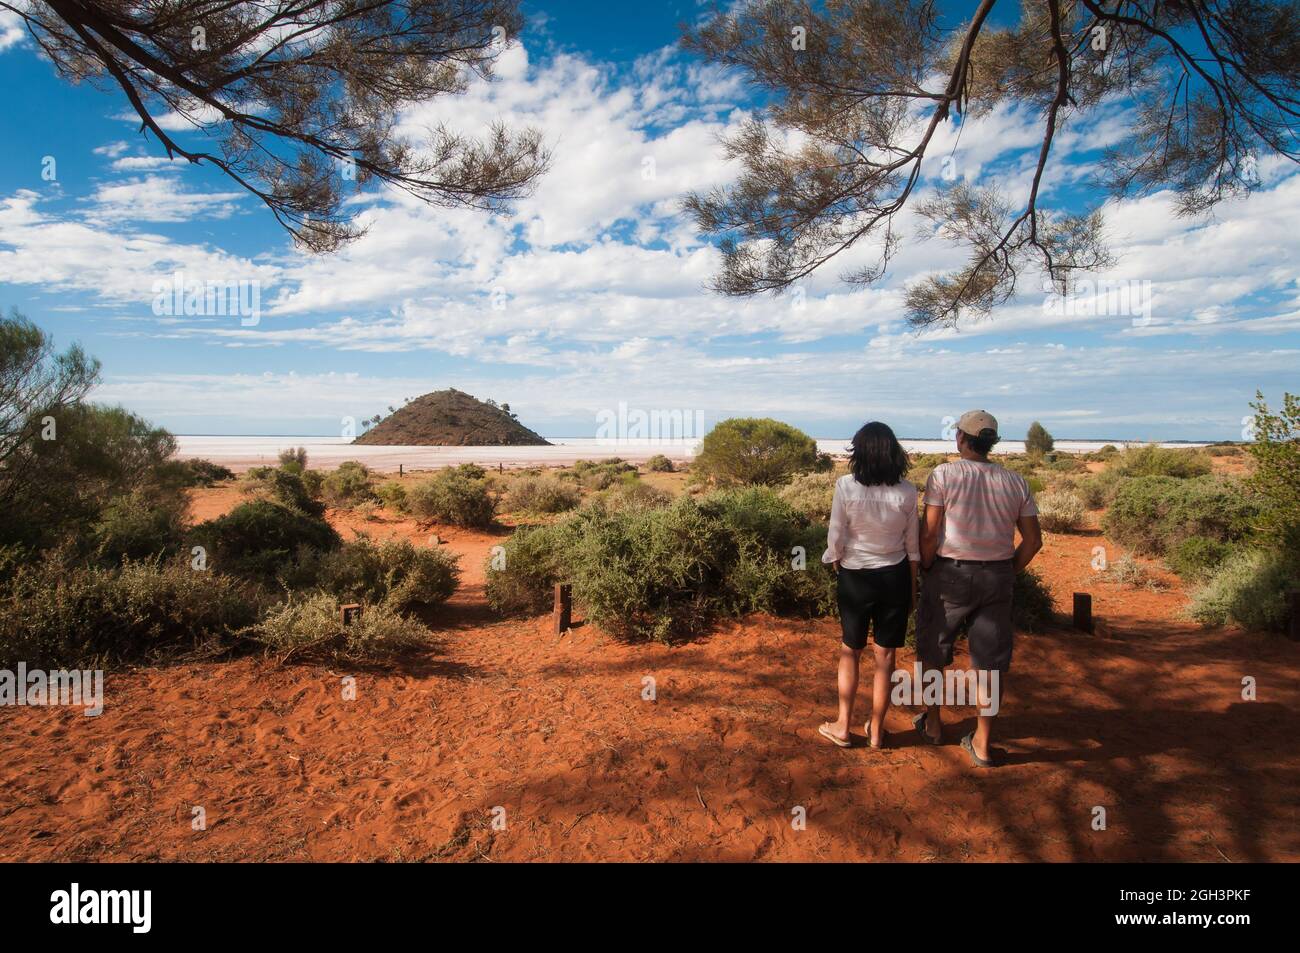 A male and female tourist viewing Lake Ballard in Western Australia, framed by the tree cover of the camp area overlooking the large salt lake. Stock Photo